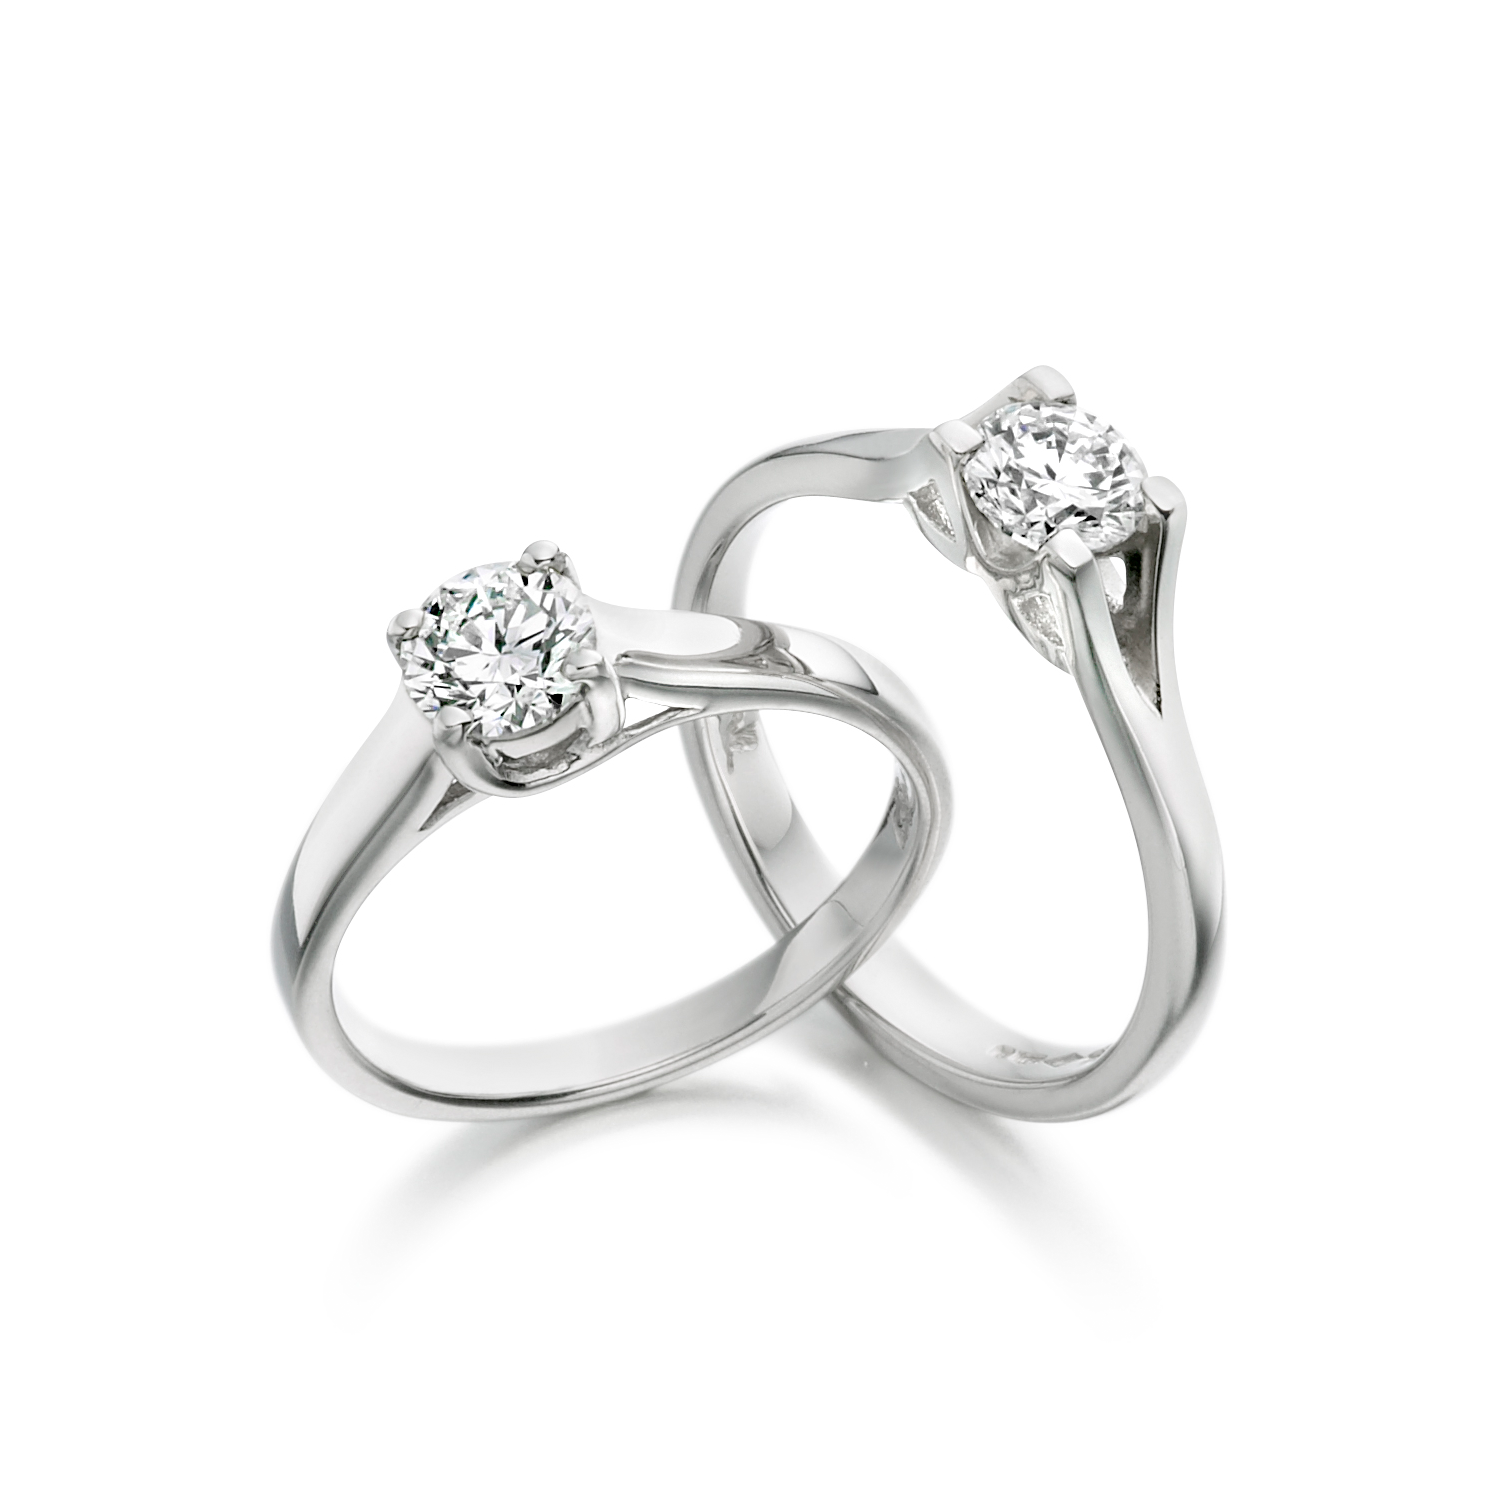 Claw set solitaire diamond rings